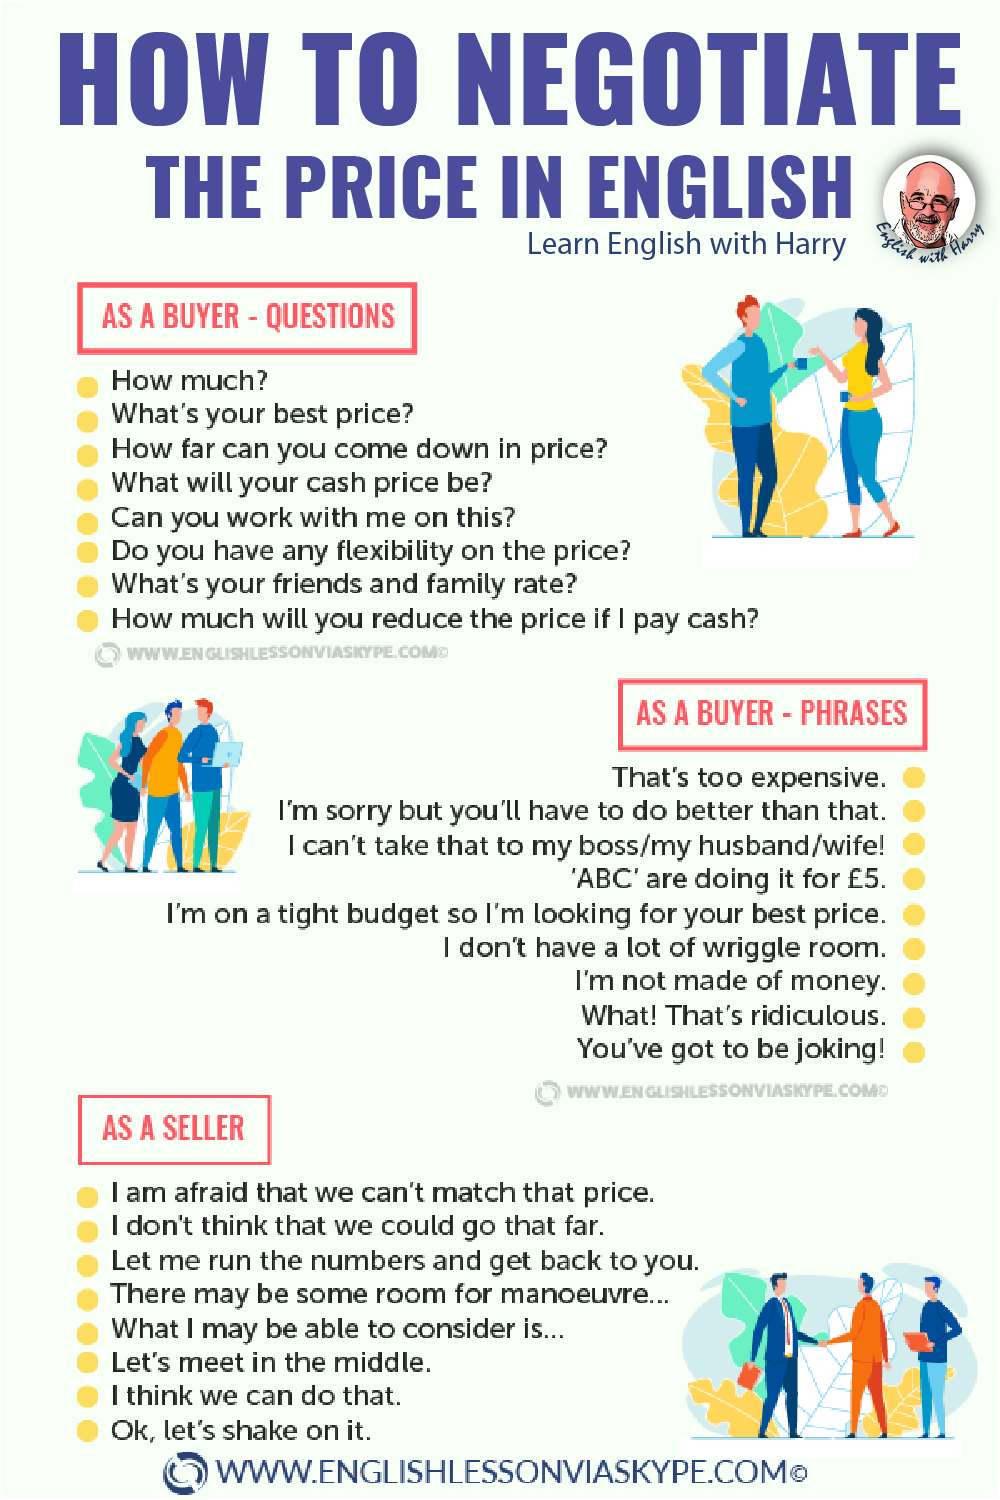 How to negotiate the price in English. Advanced English expressions. Study business English at www.englishlessonviaskype.com #learnenglish #englishlessons